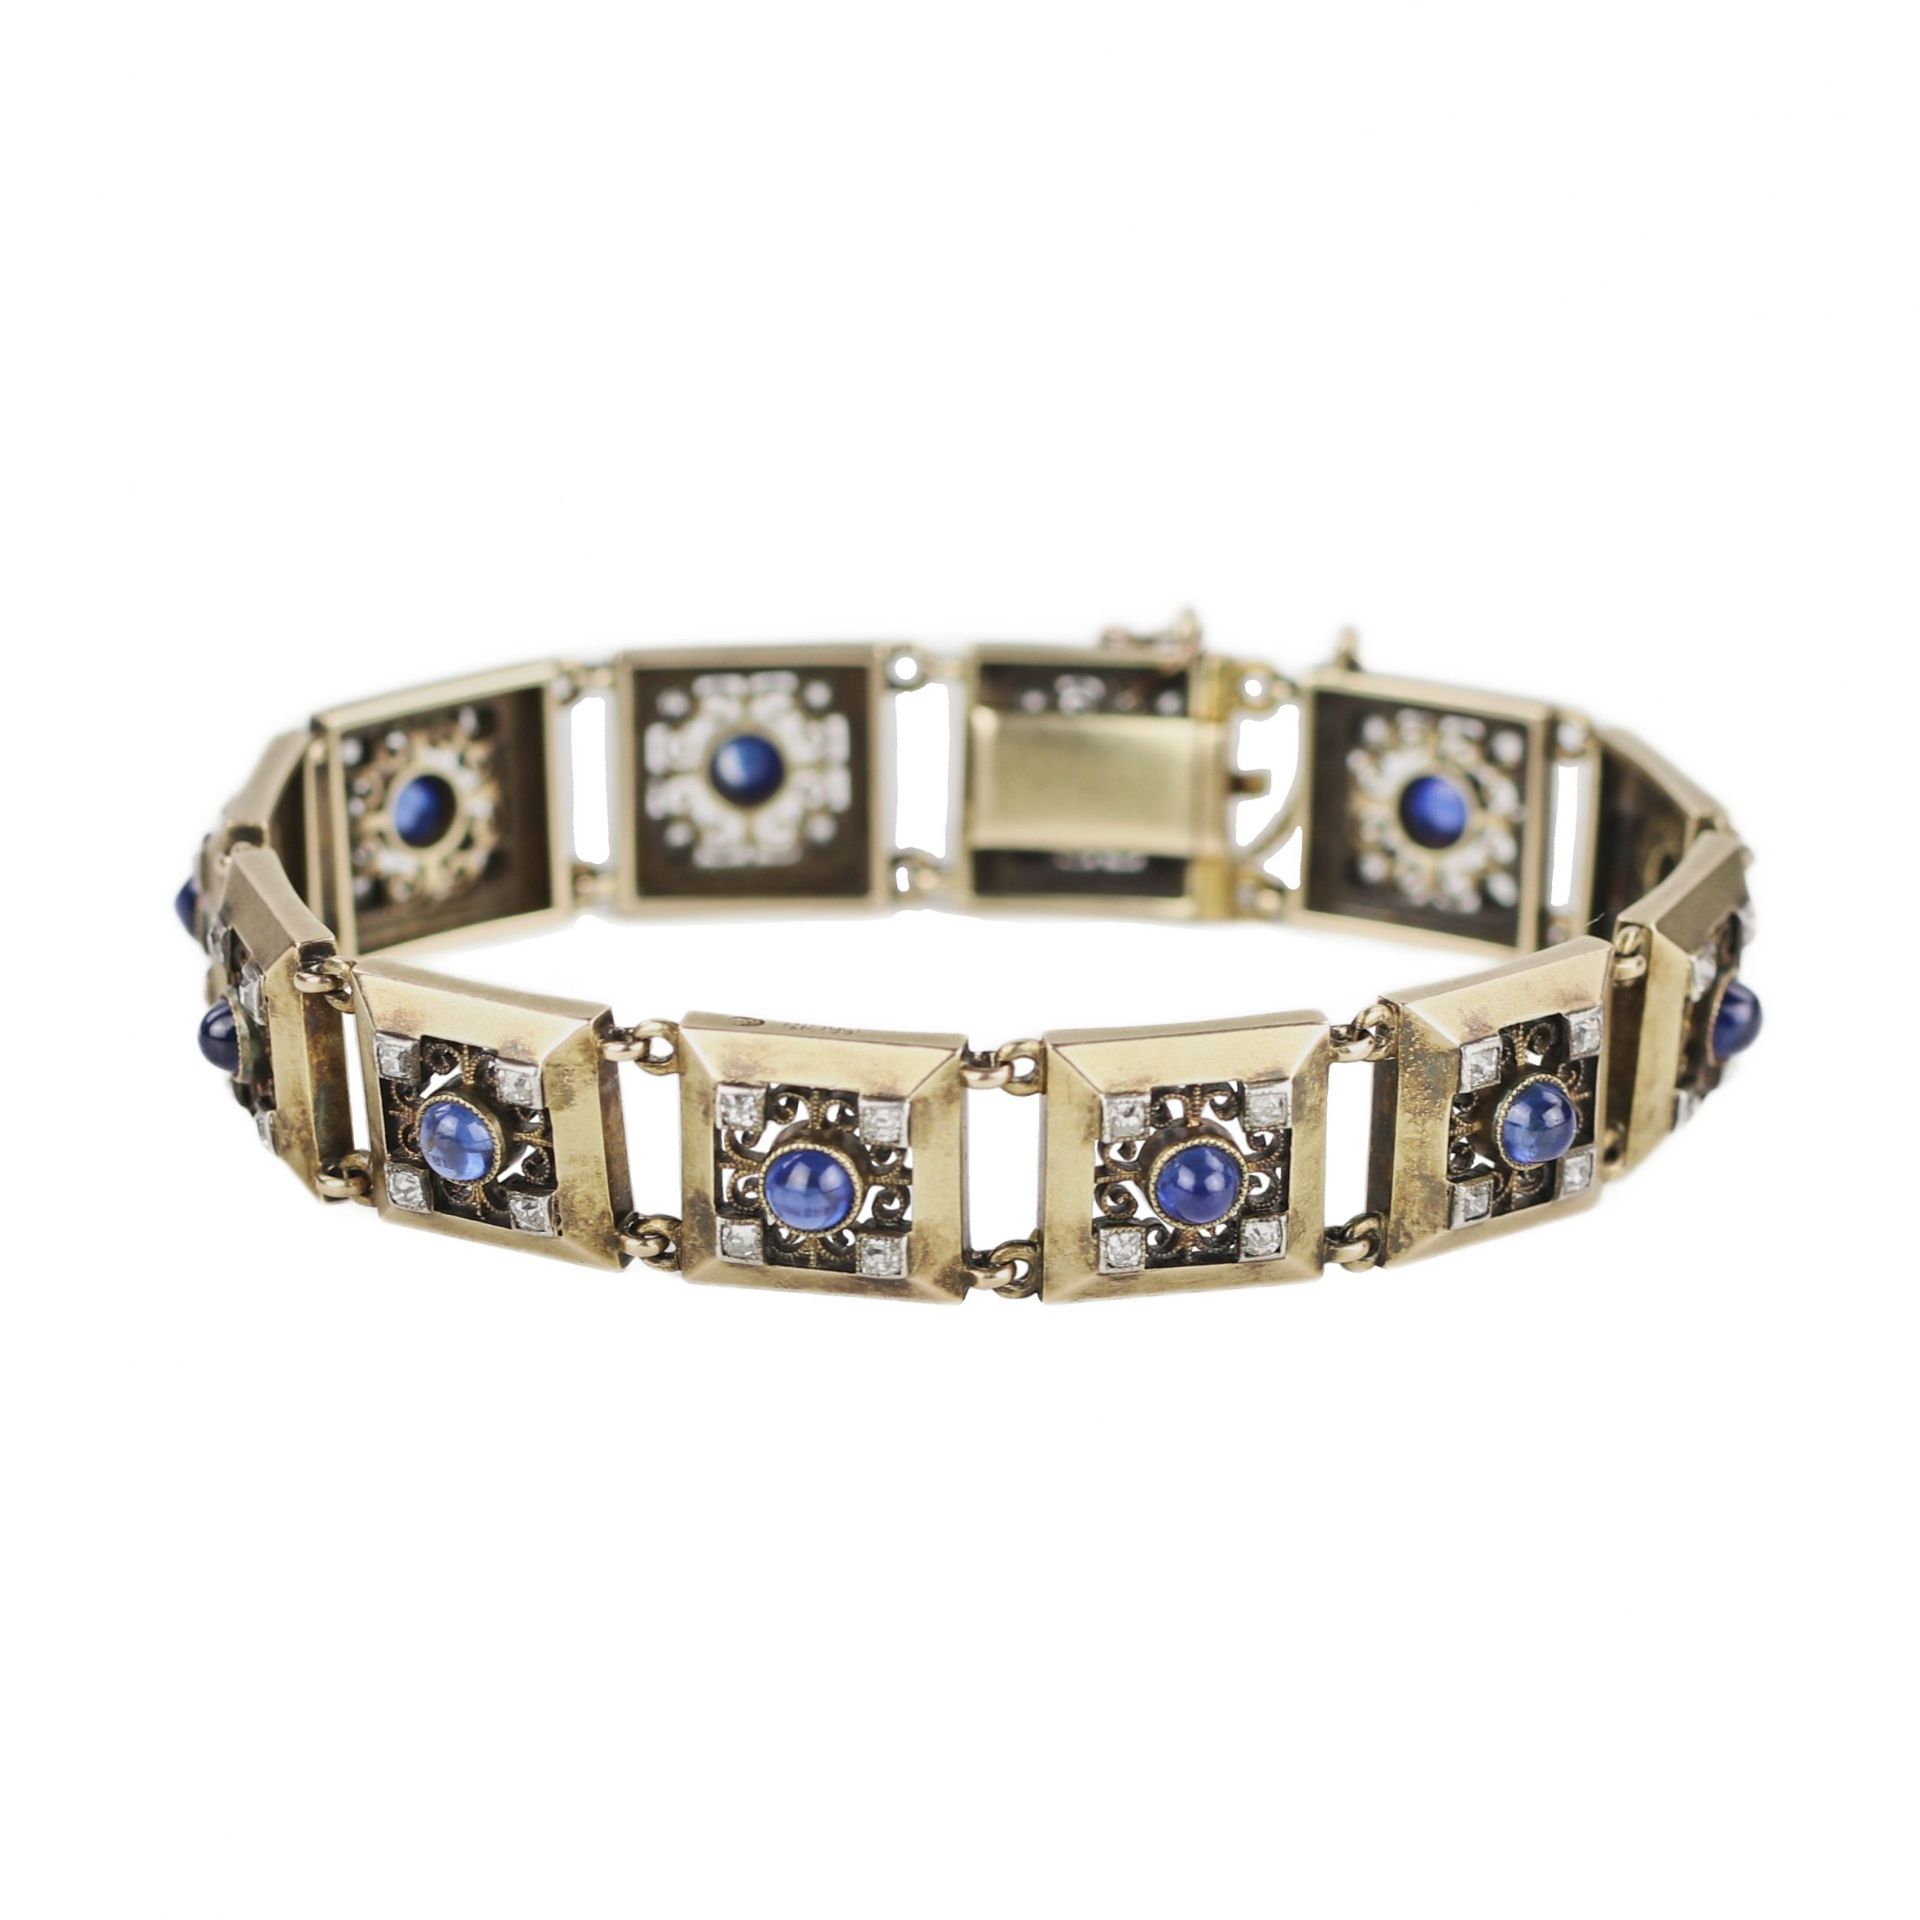 Elegant 56-carat Russian gold bracelet with sapphires and diamonds from Faberge firm. Moscow, Russia - Image 6 of 8